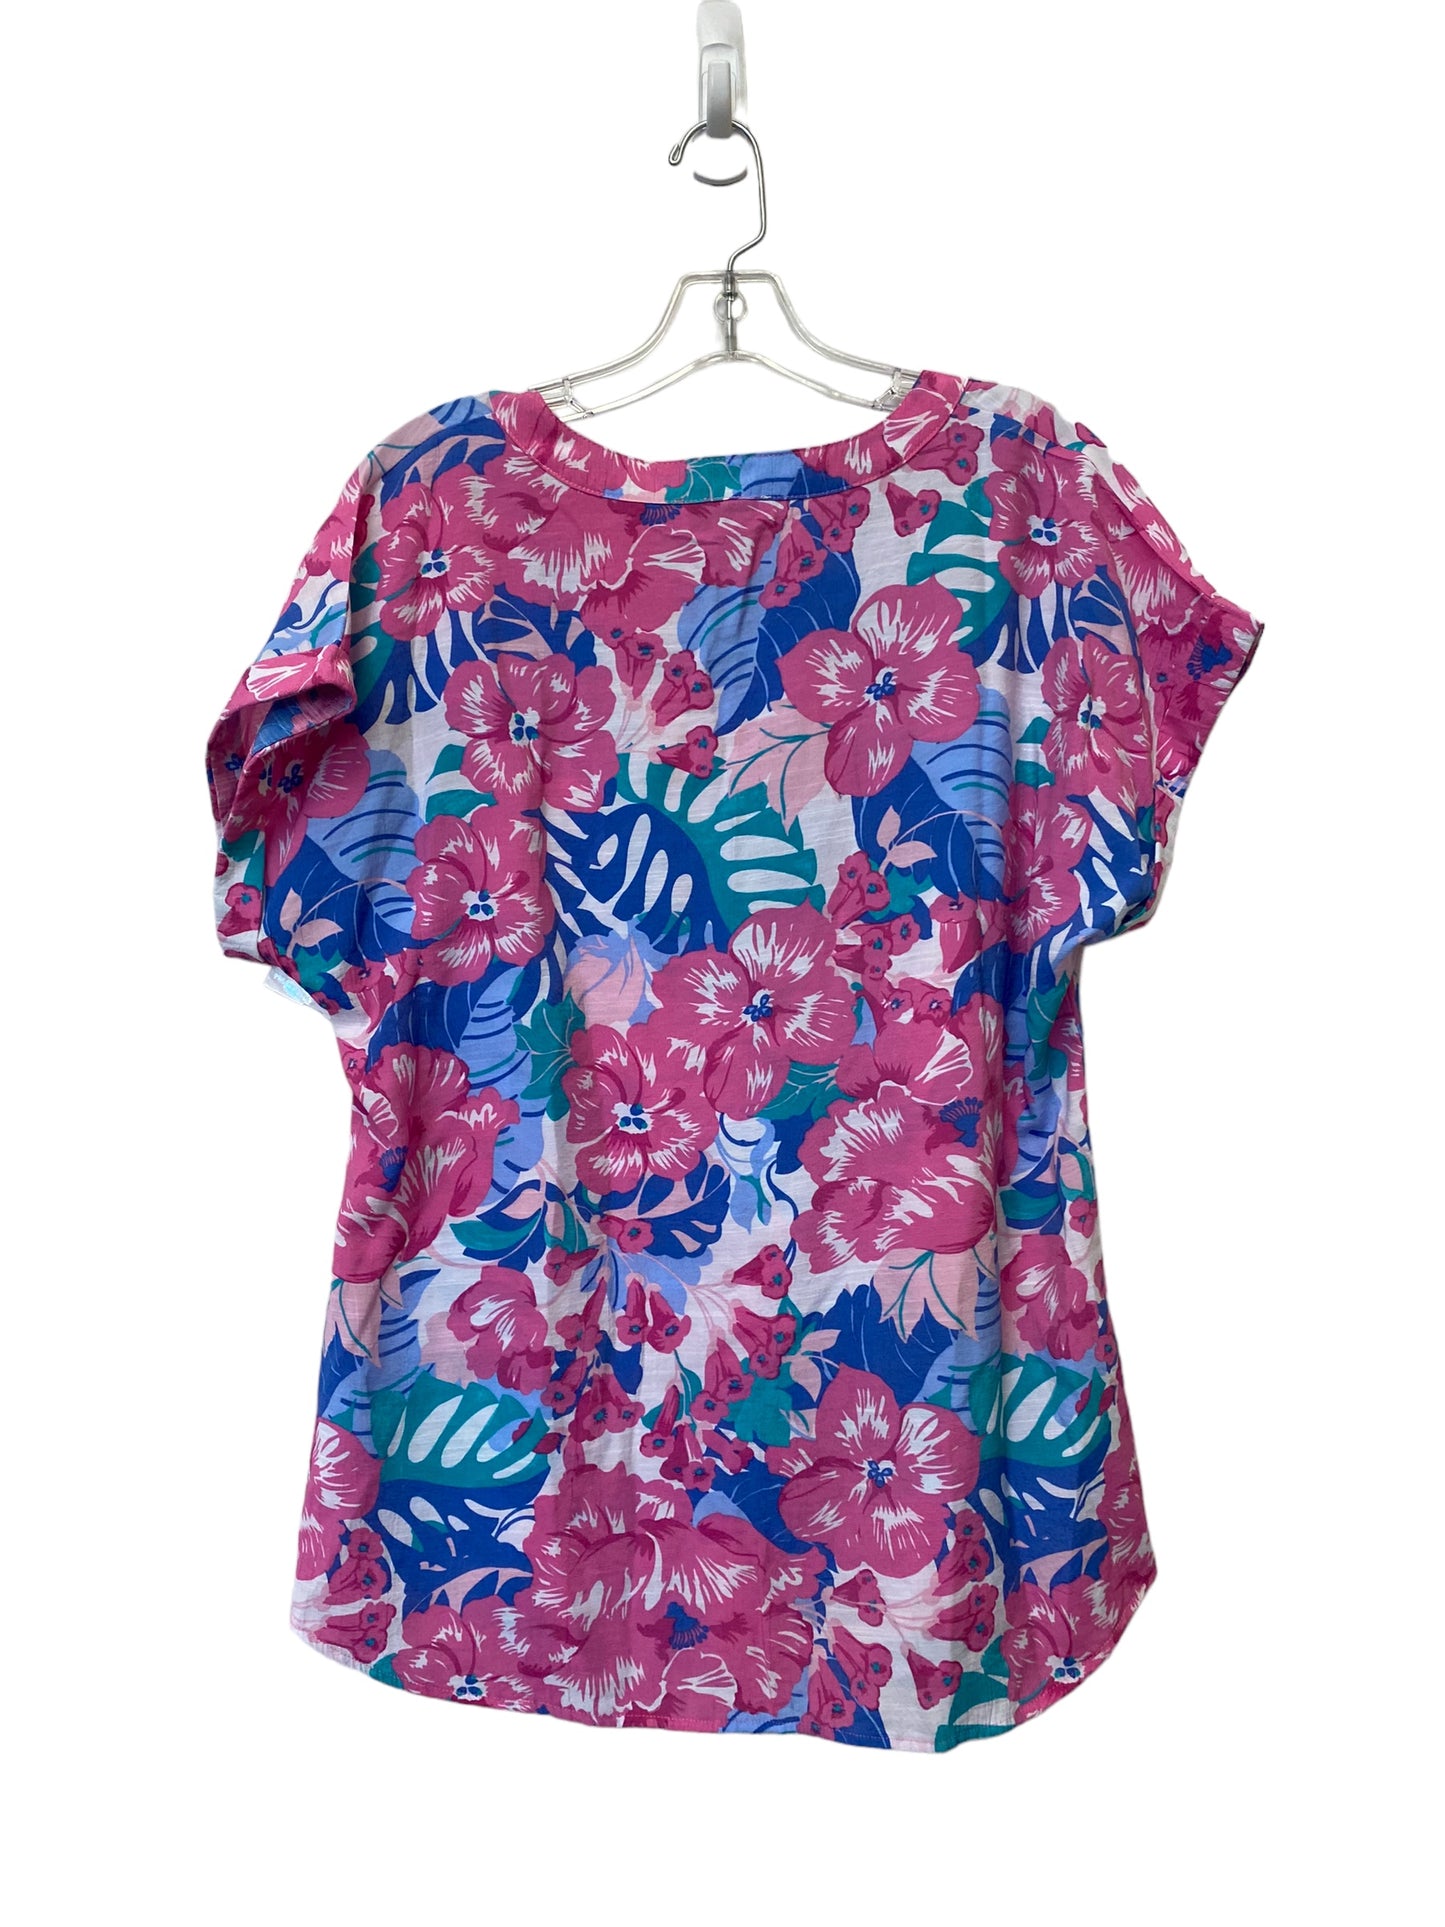 Top Short Sleeve By Kim Rogers  Size: M